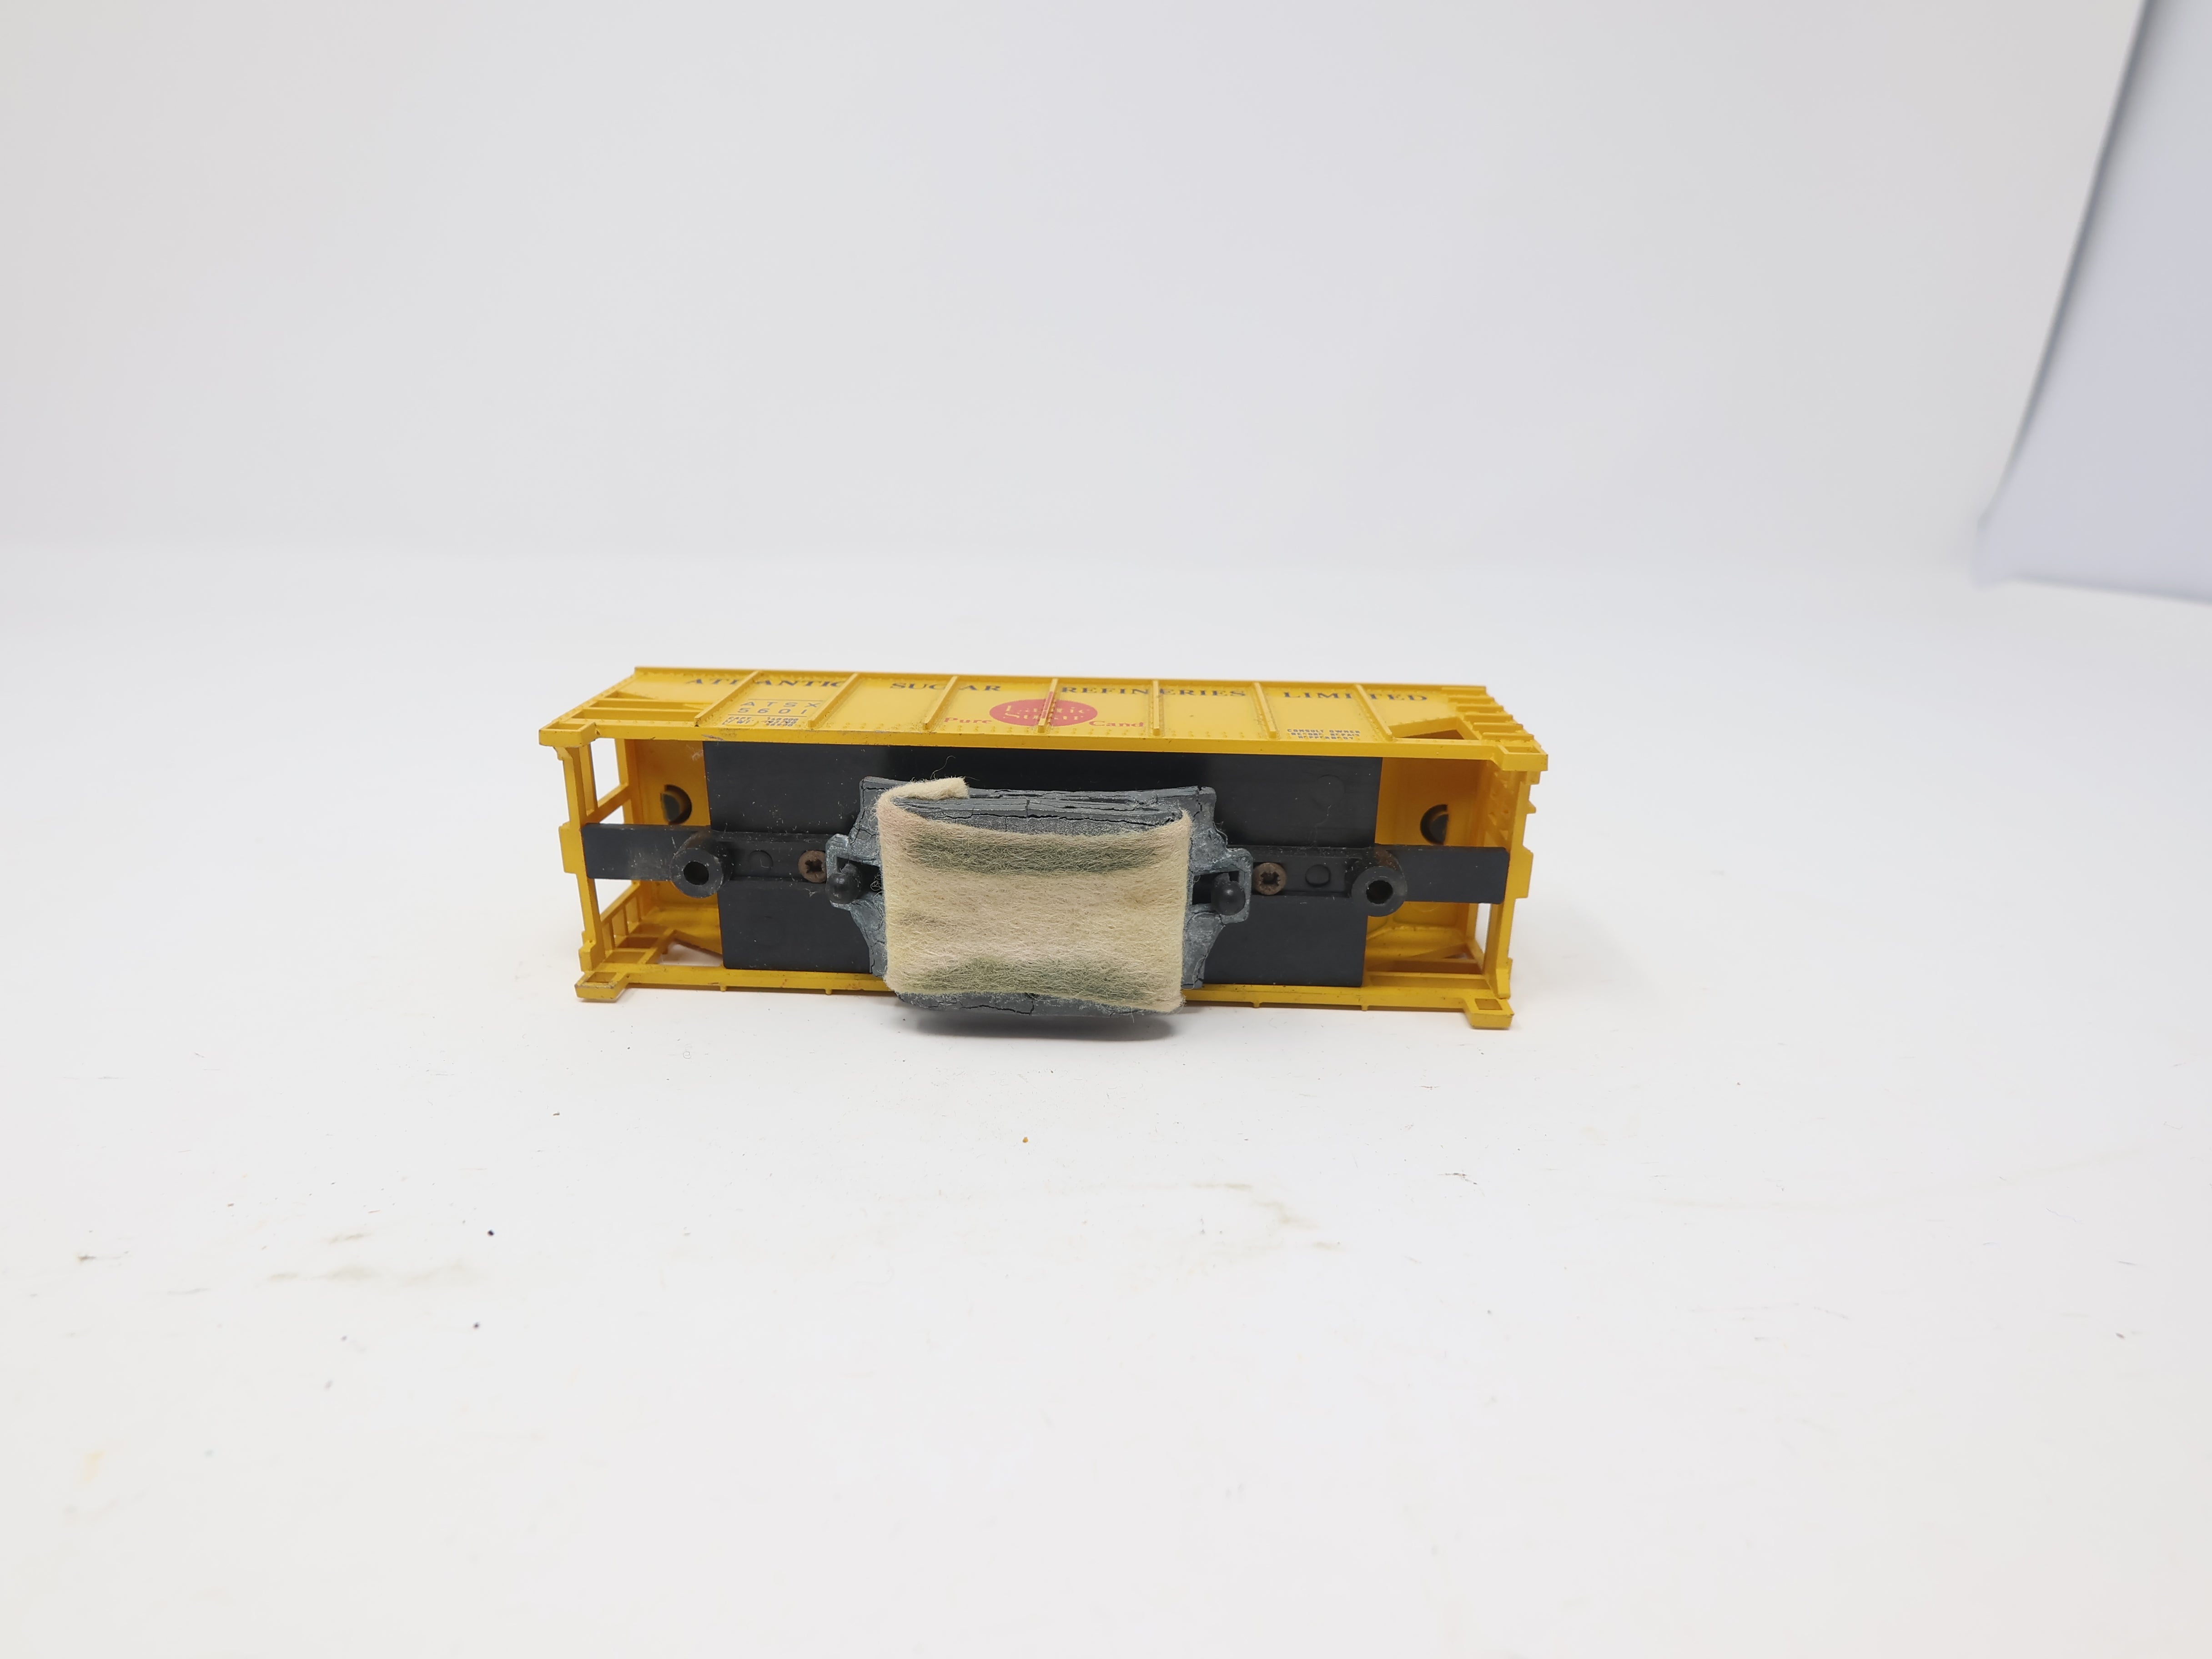 USED AHM HO Scale, 2 Bay Covered Hopper, Atlantic Sugar ATSX #5601, Track Cleaning Car, For Parts or Repairs